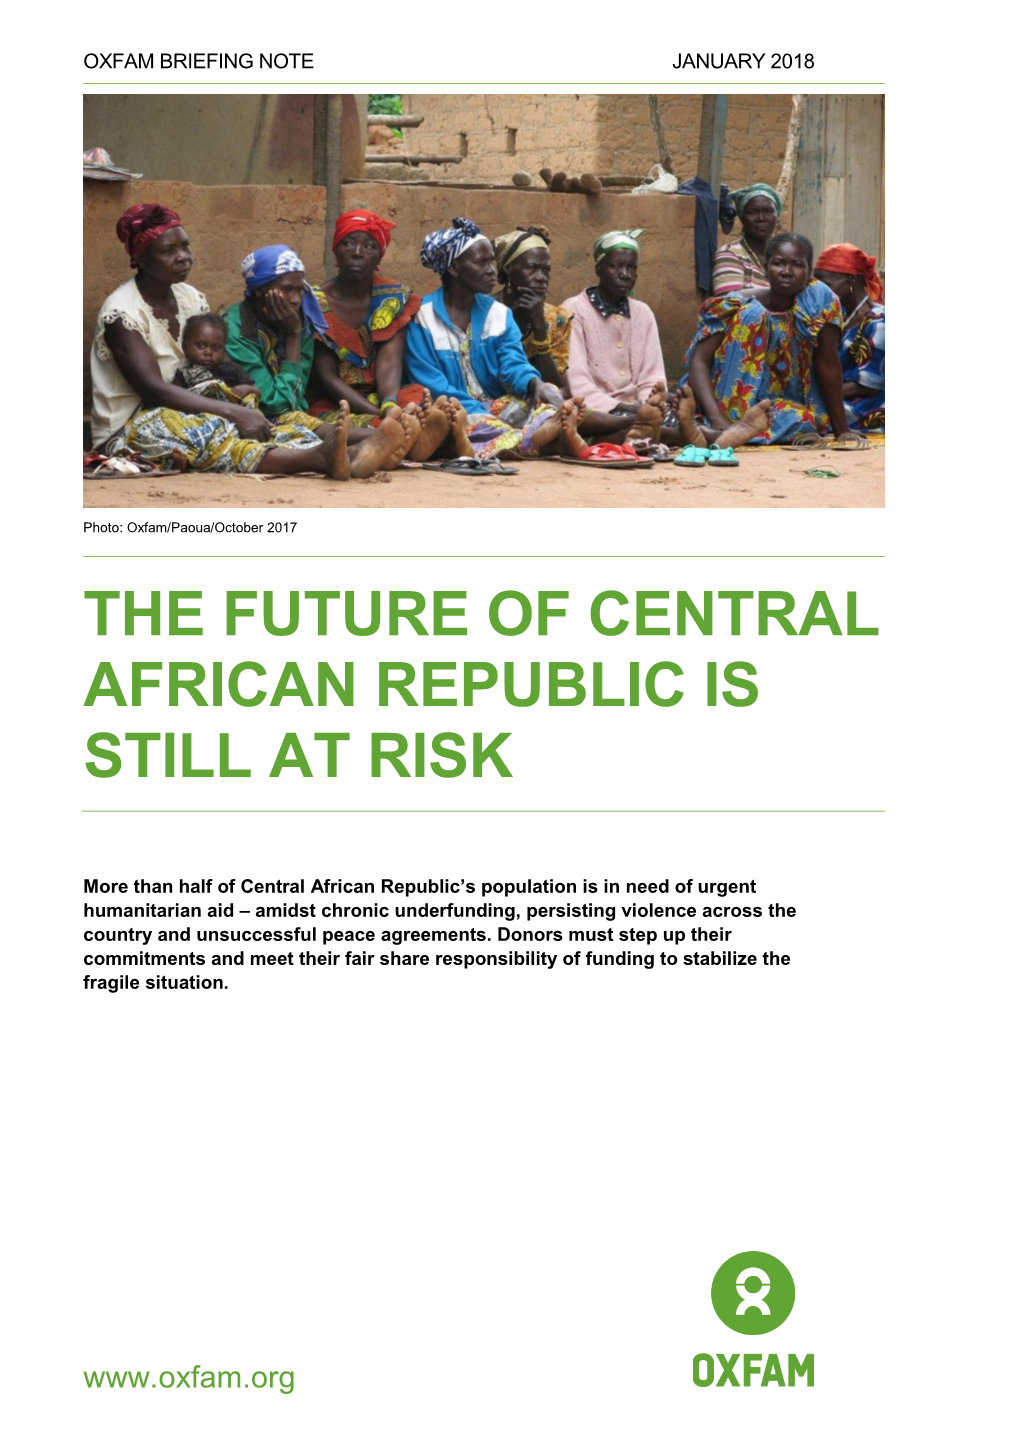 The Future of Central African Republic Is Still at Risk